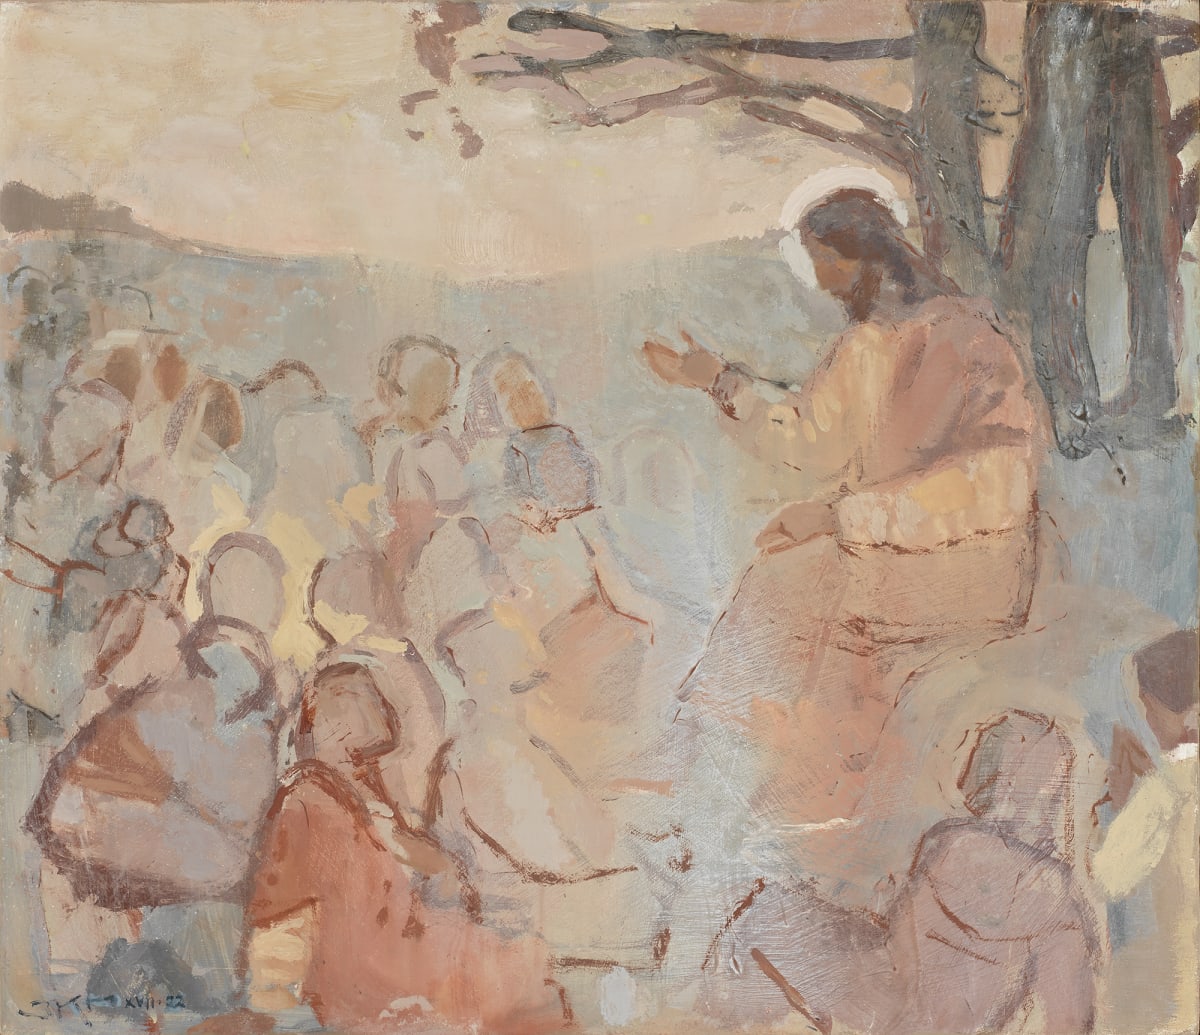 Blessed Are They by J. Kirk Richards  Image: Jesus teaches the Sermon on the Mount. 

Available in print form via Shopify. 
